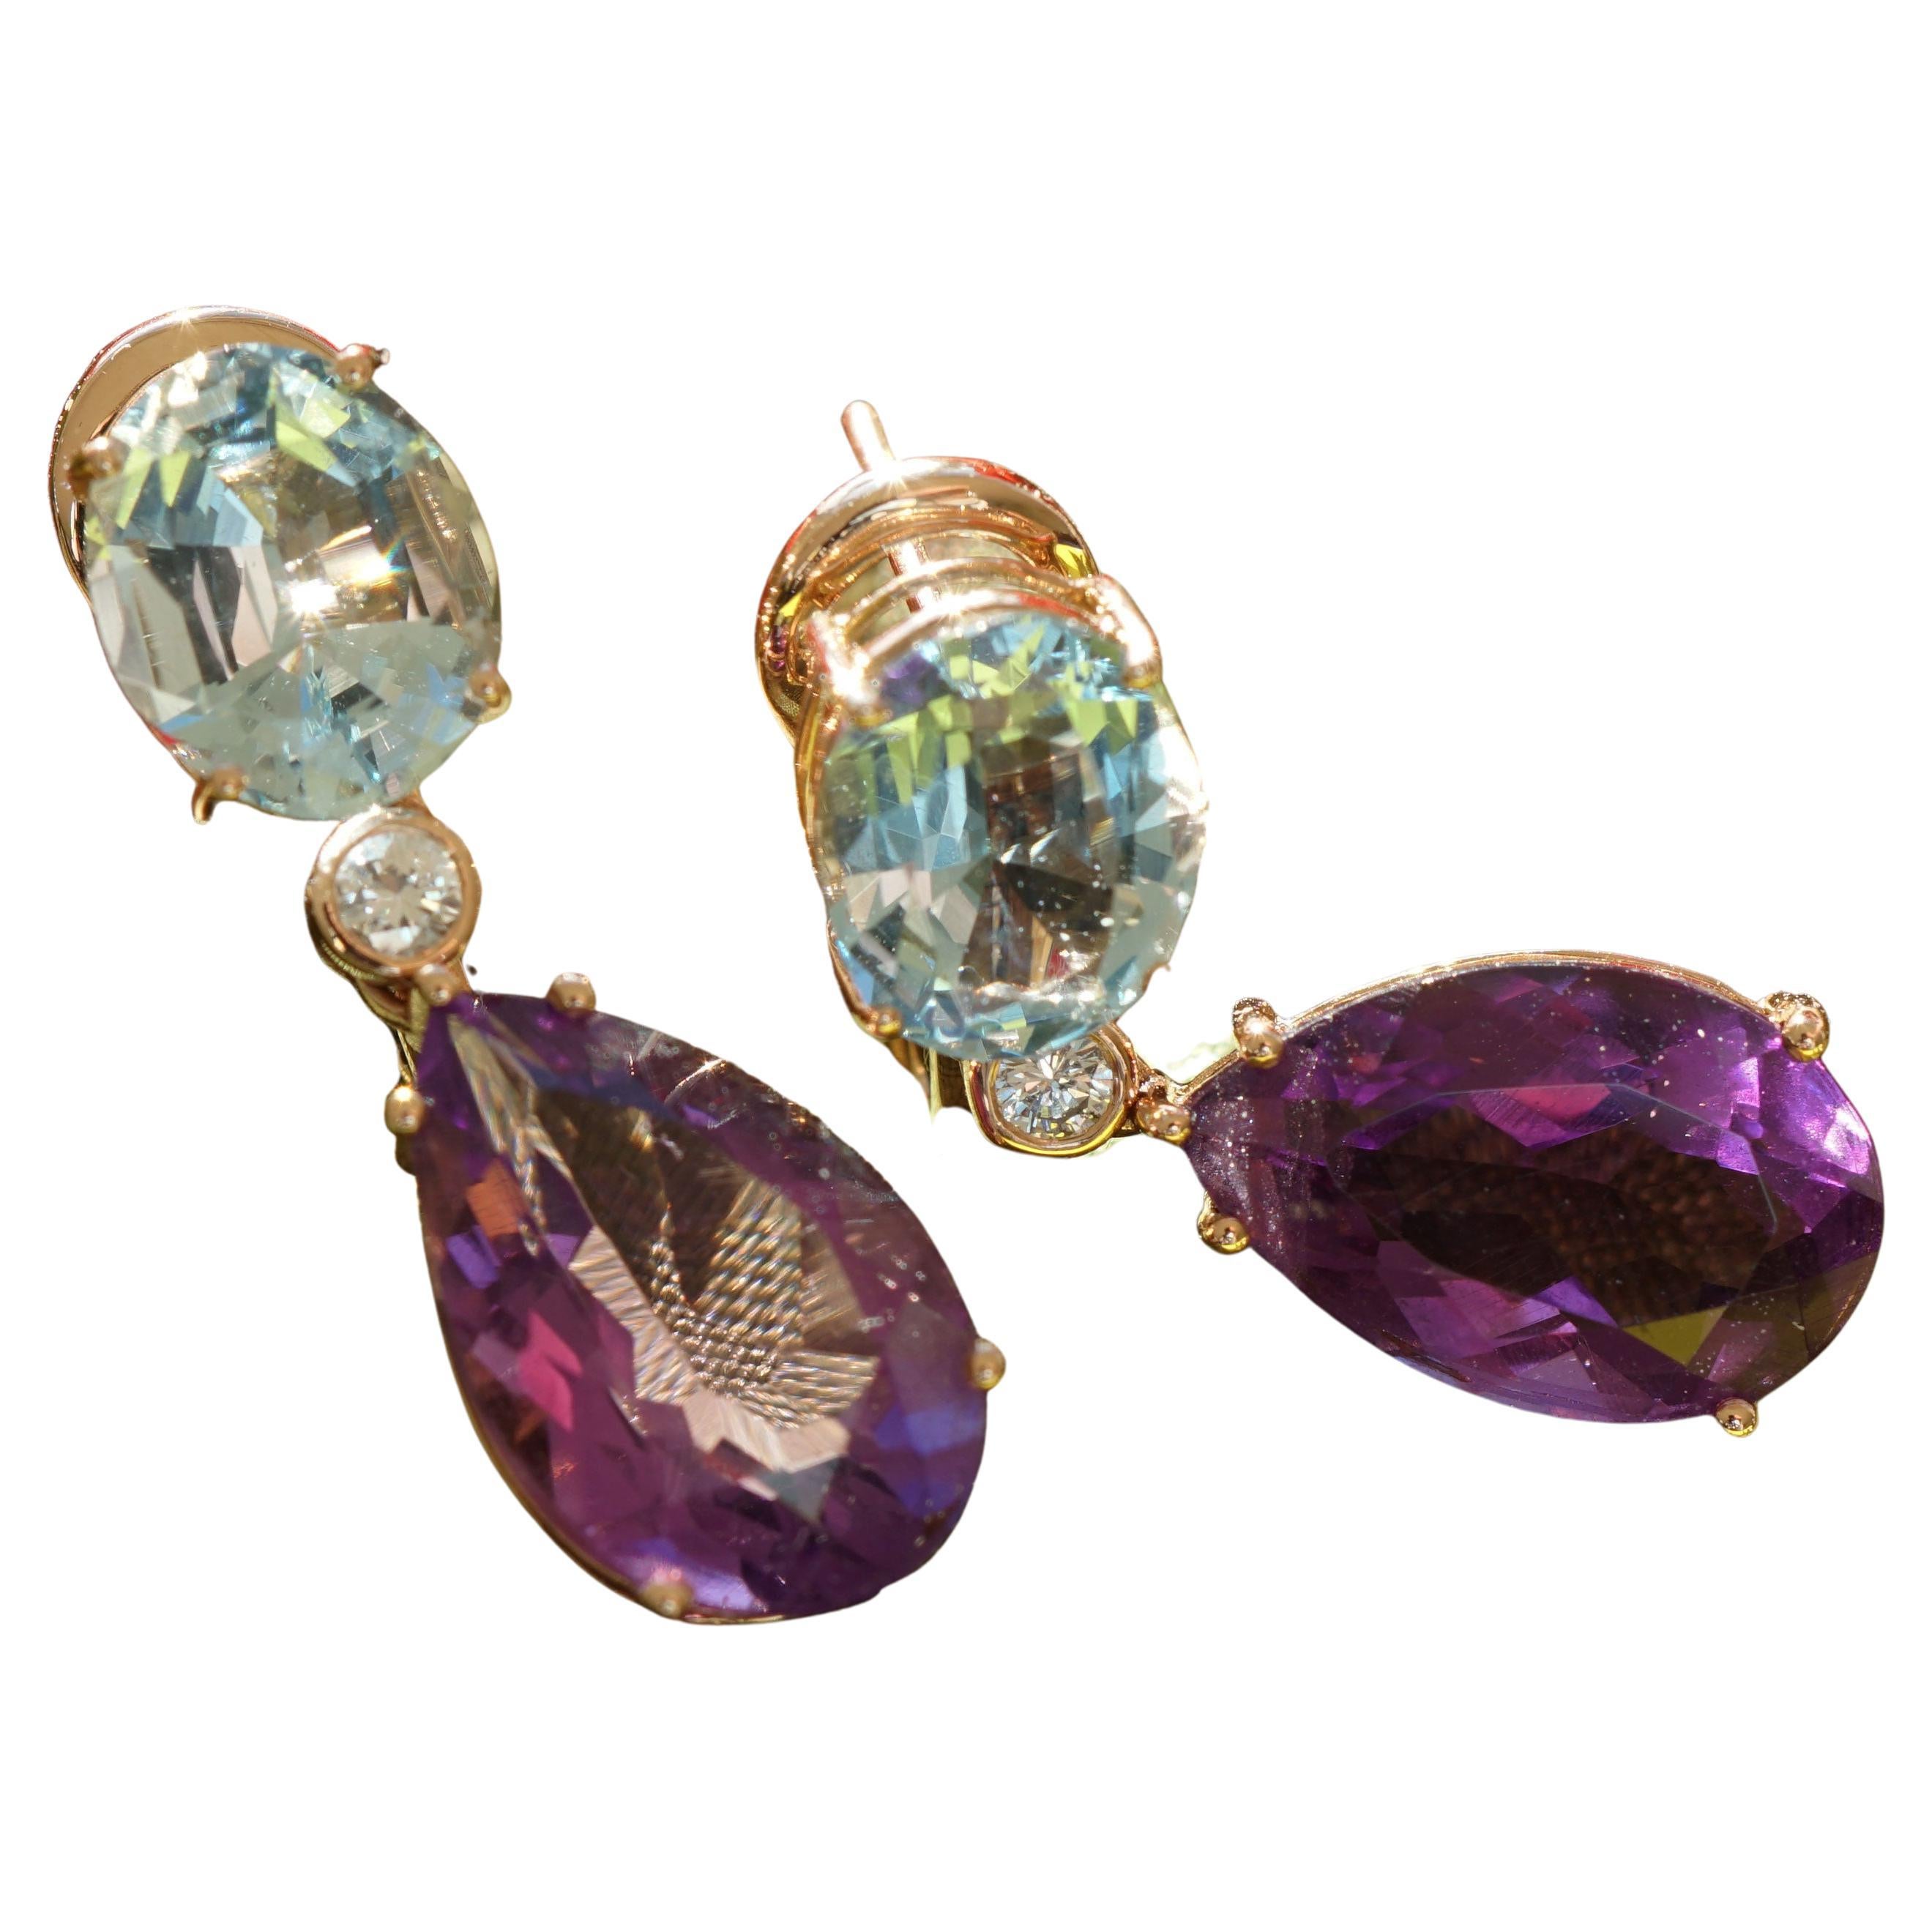 Aquamarin Amethyst Diamond Earrings 18kt Rosegold Great Quality from Madagascar For Sale